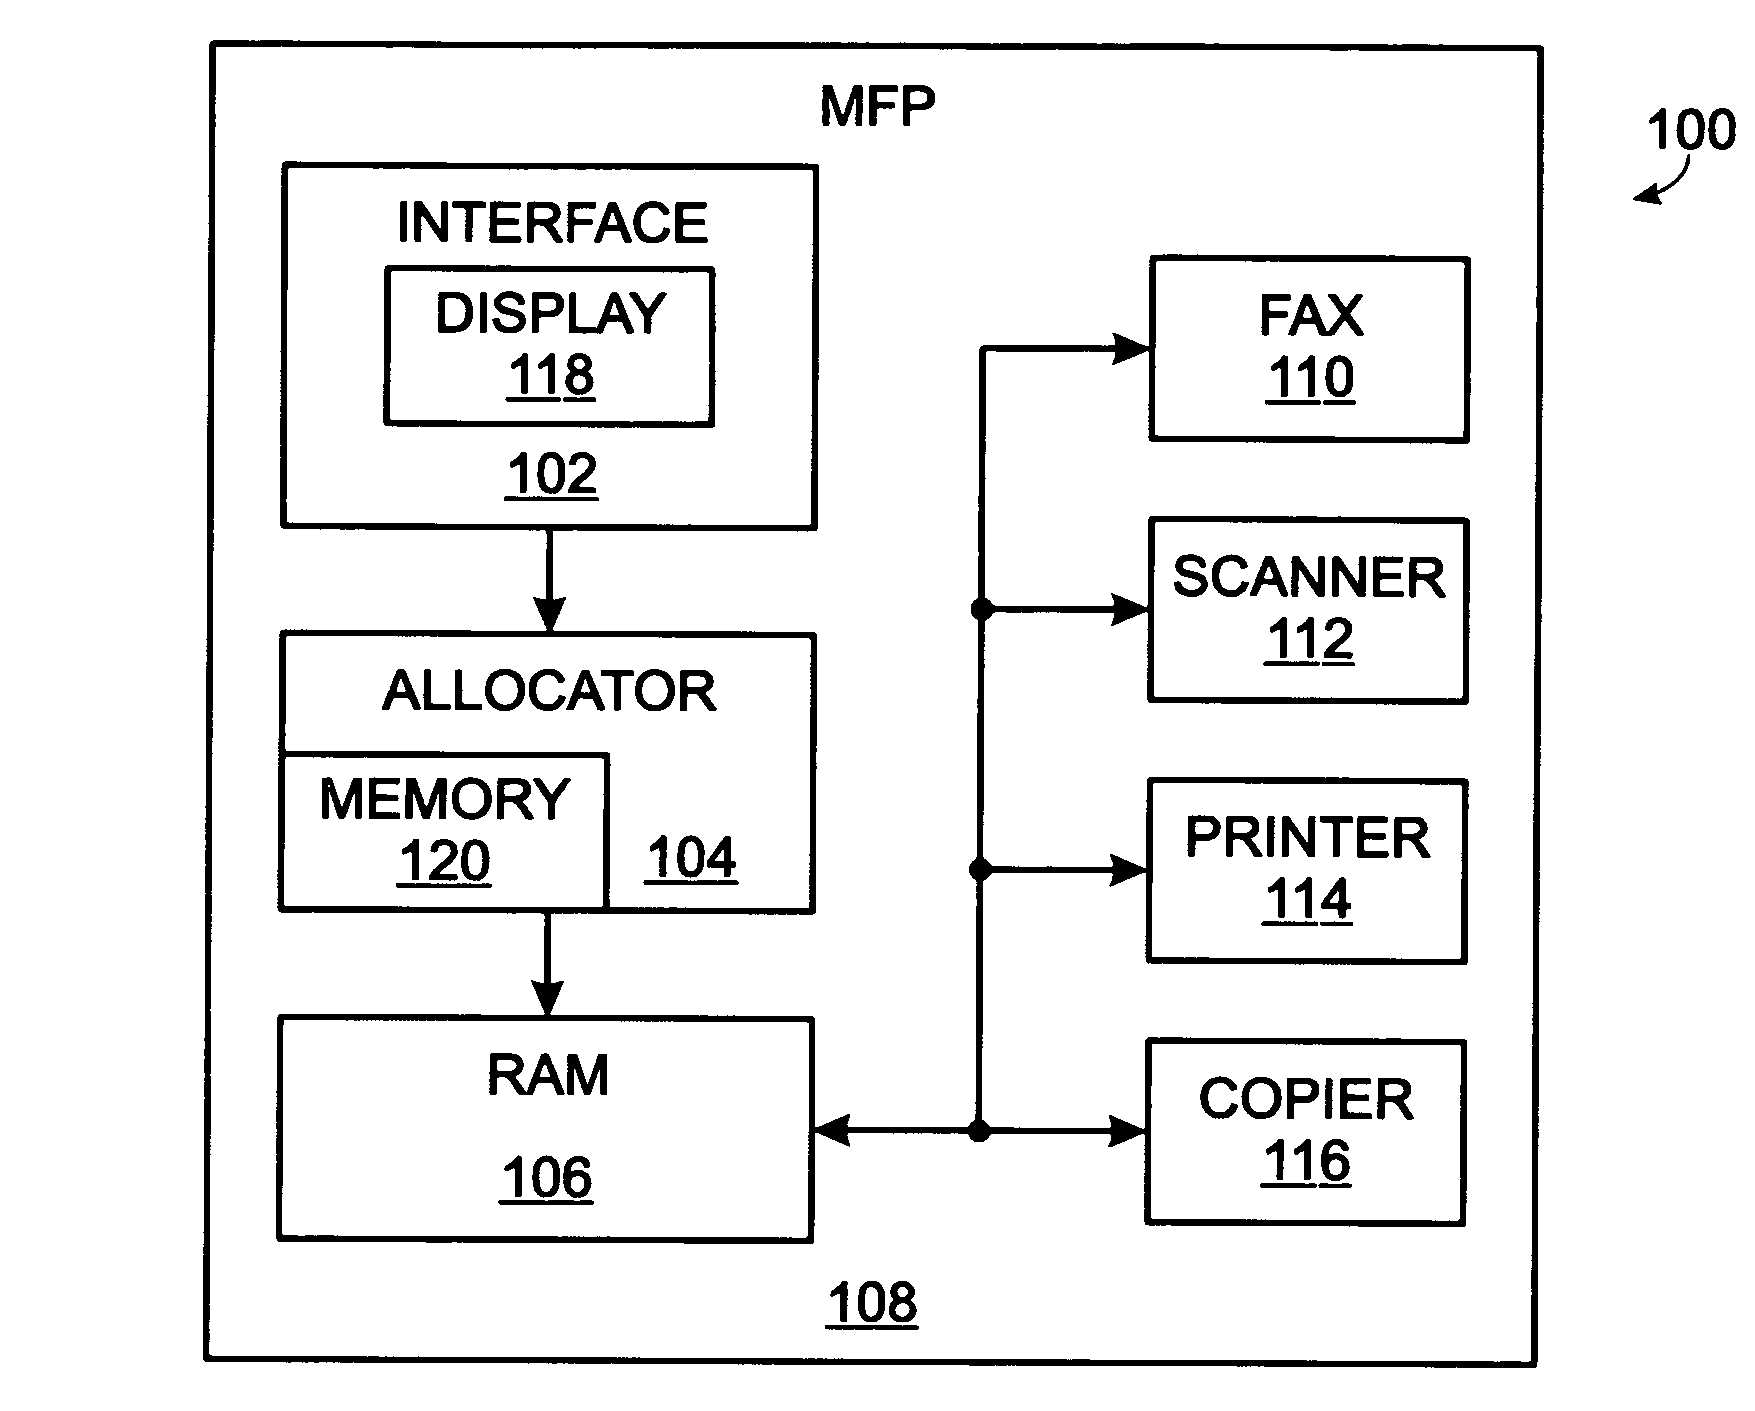 System and method for allocating random access memory in a multifunction peripheral device